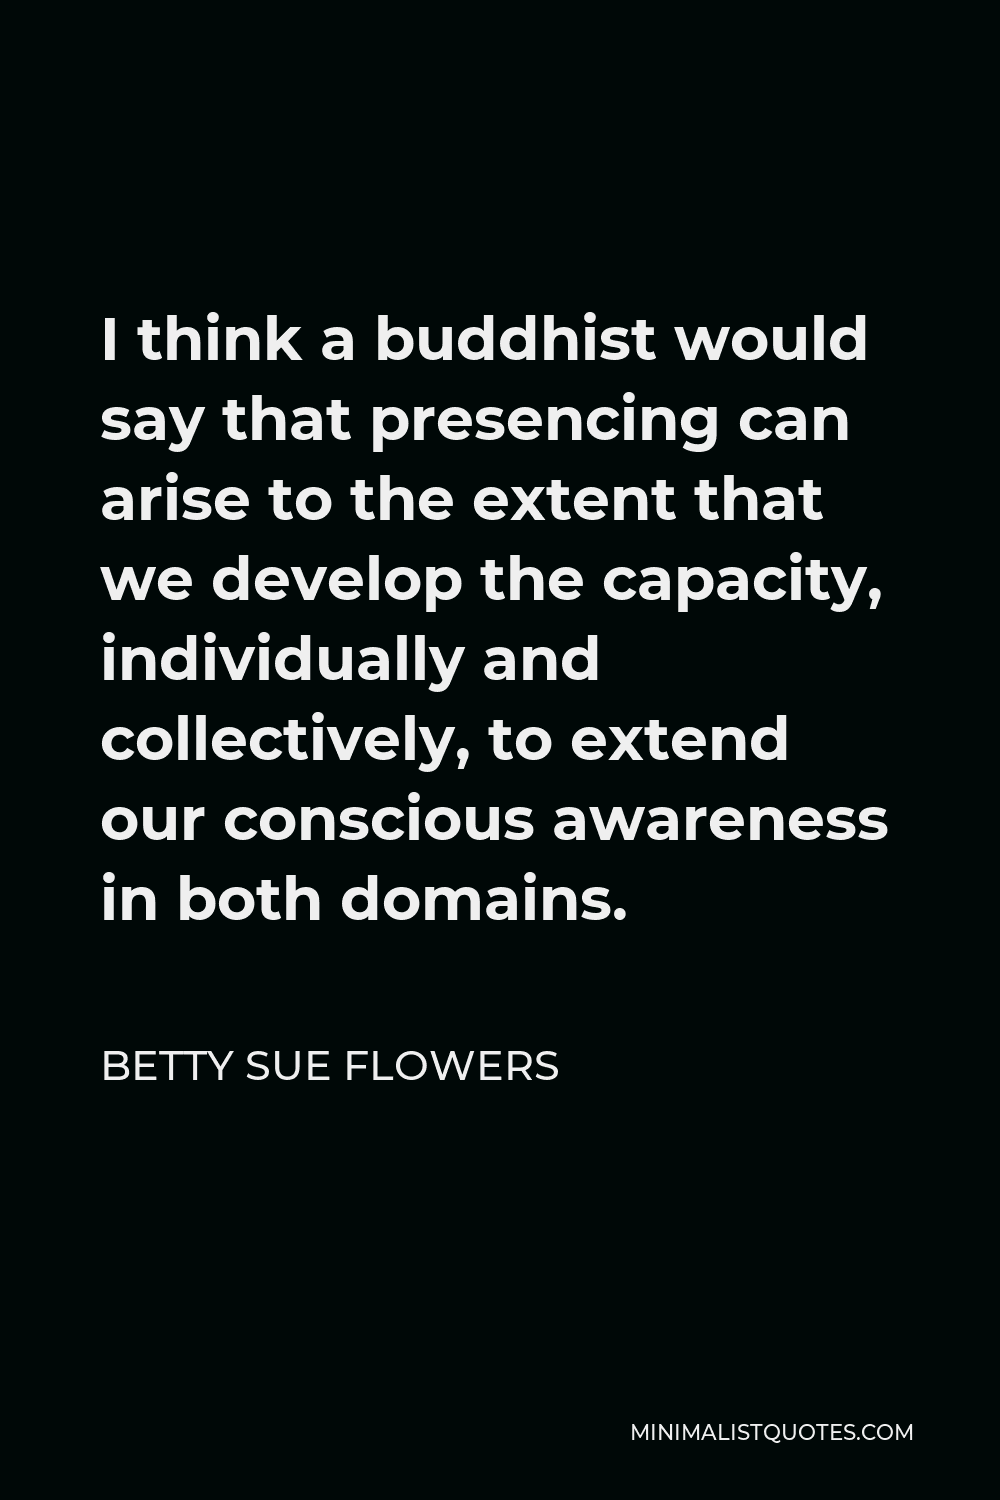 Betty Sue Flowers Quote - I think a buddhist would say that presencing can arise to the extent that we develop the capacity, individually and collectively, to extend our conscious awareness in both domains.